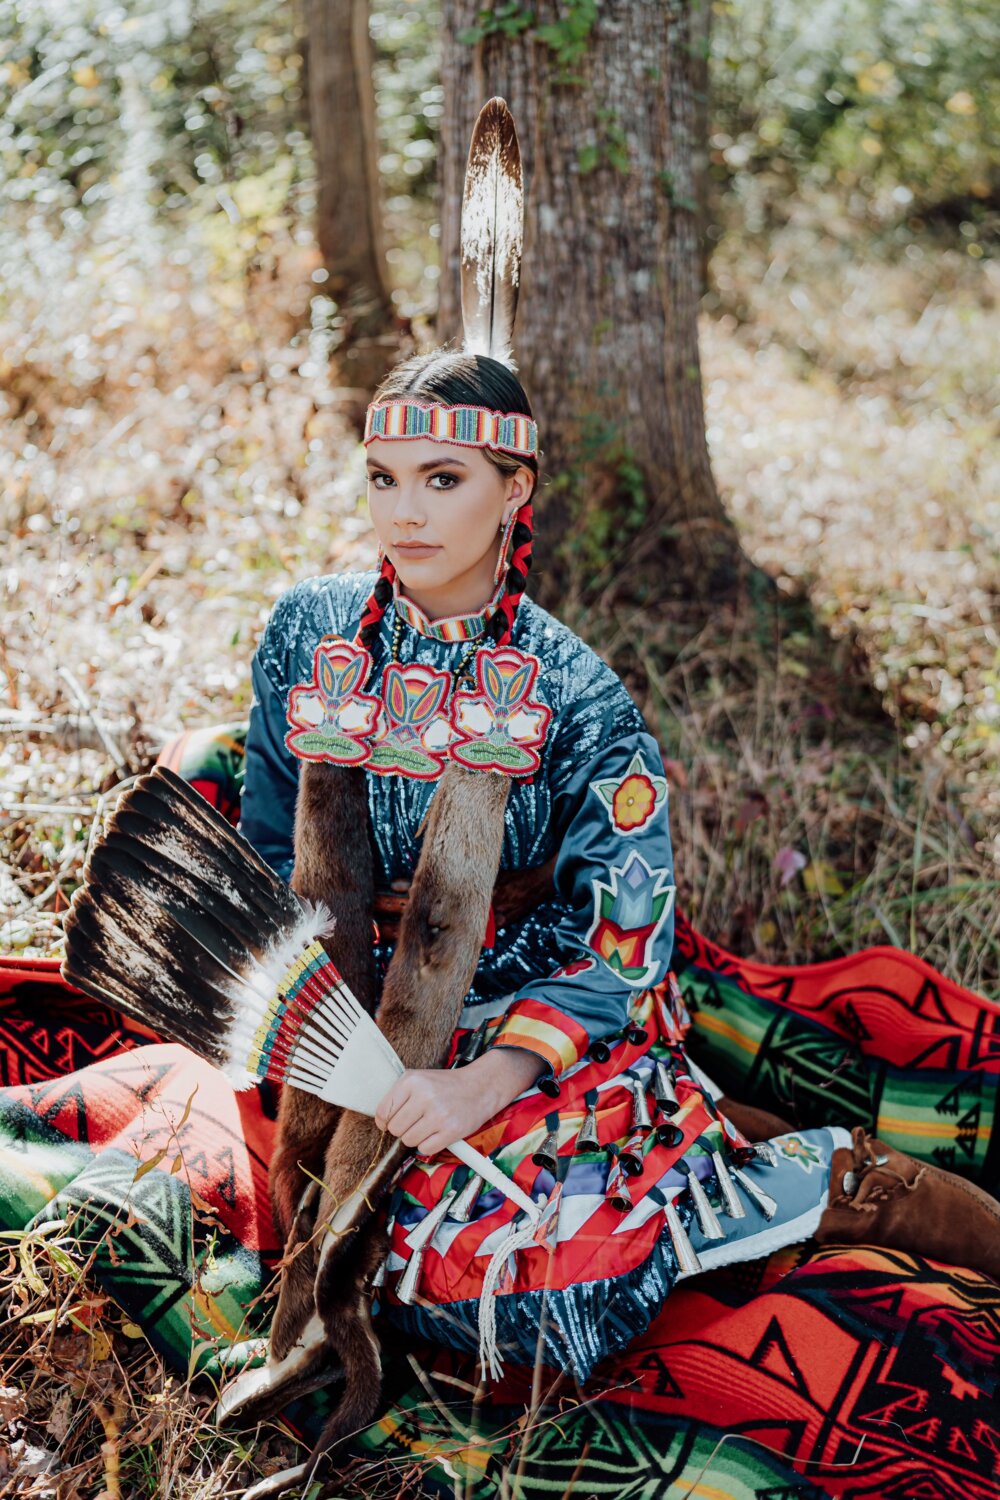 Reagan McLaurin, a 15-year-old Lumbee citizen, will particpate in the pow wow as a jingle dancer.